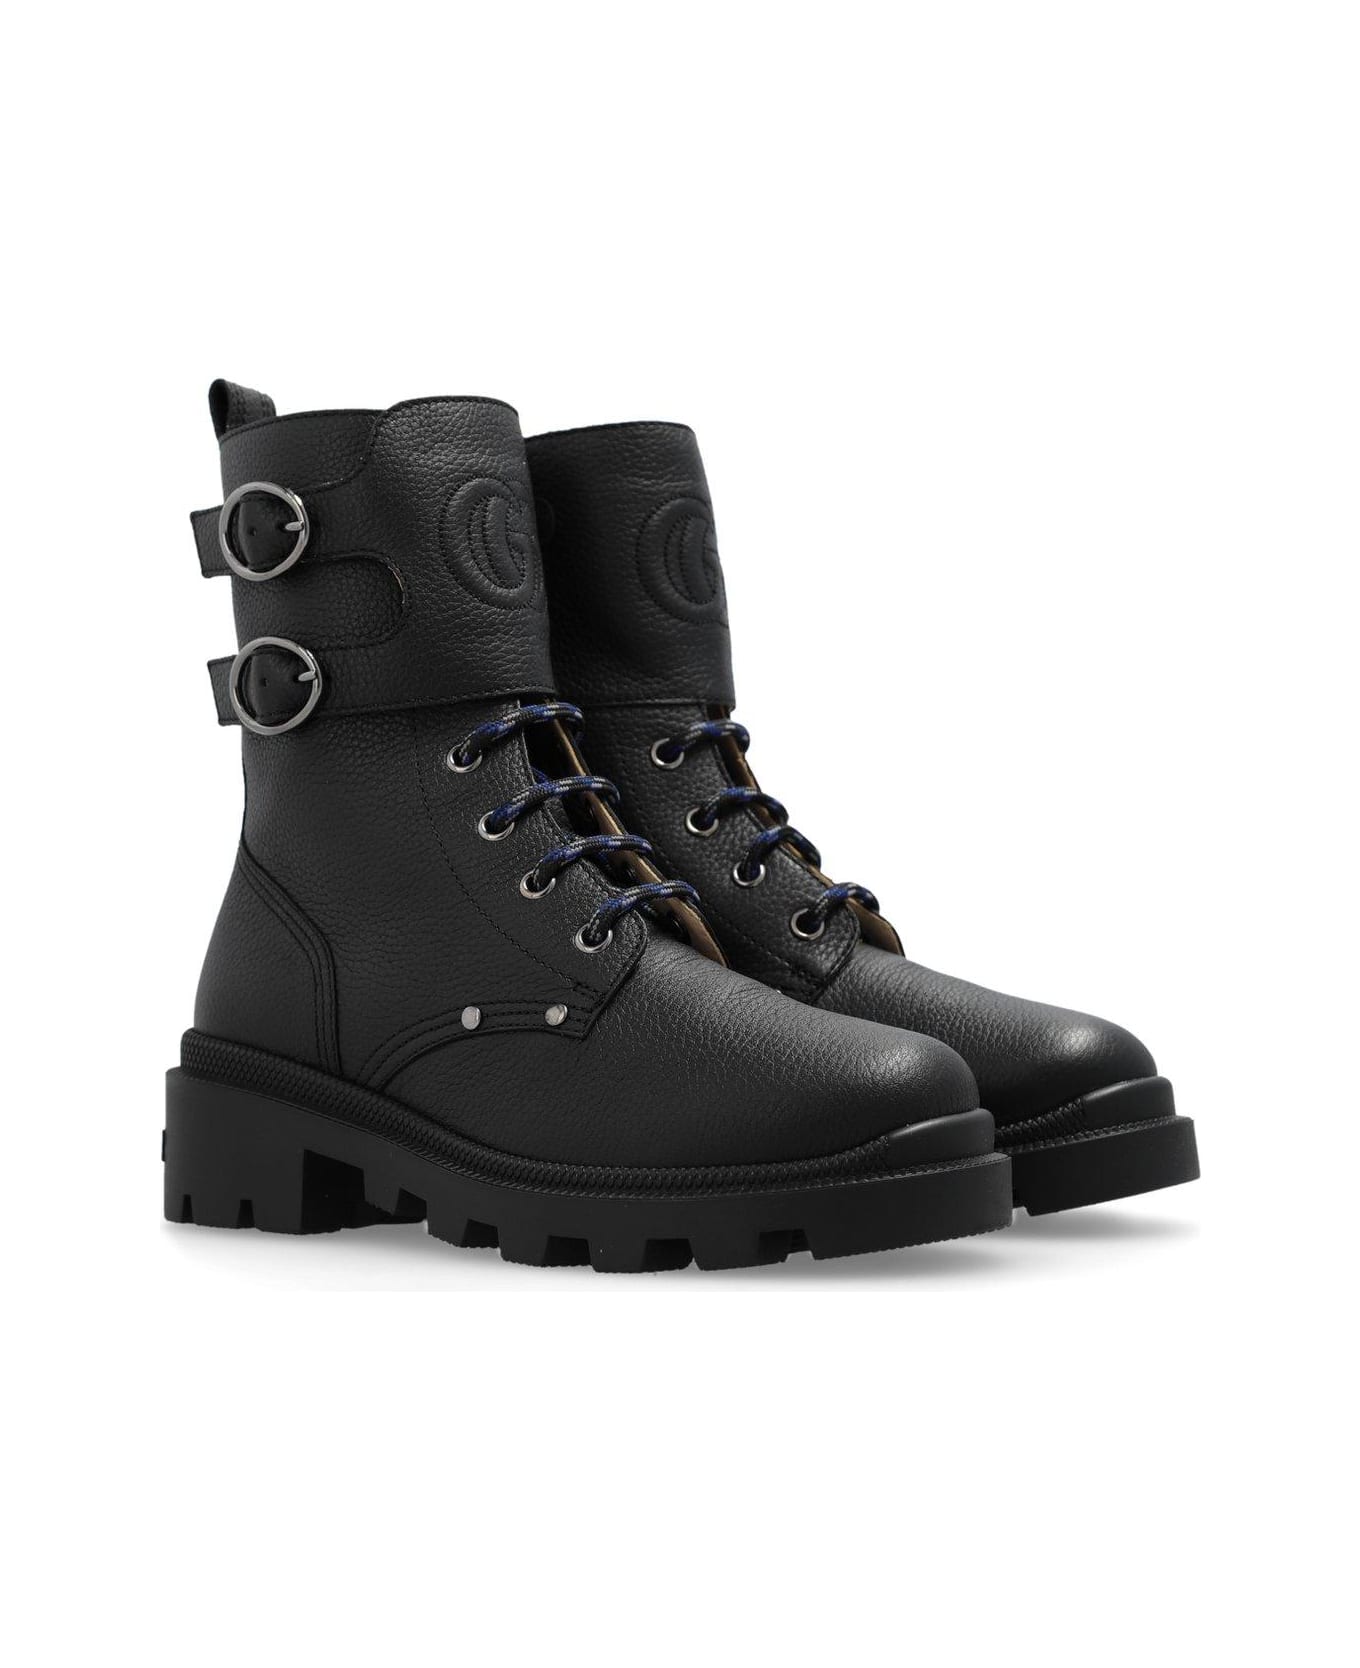 Gucci Double G Lace-up Boots - Black シューズ